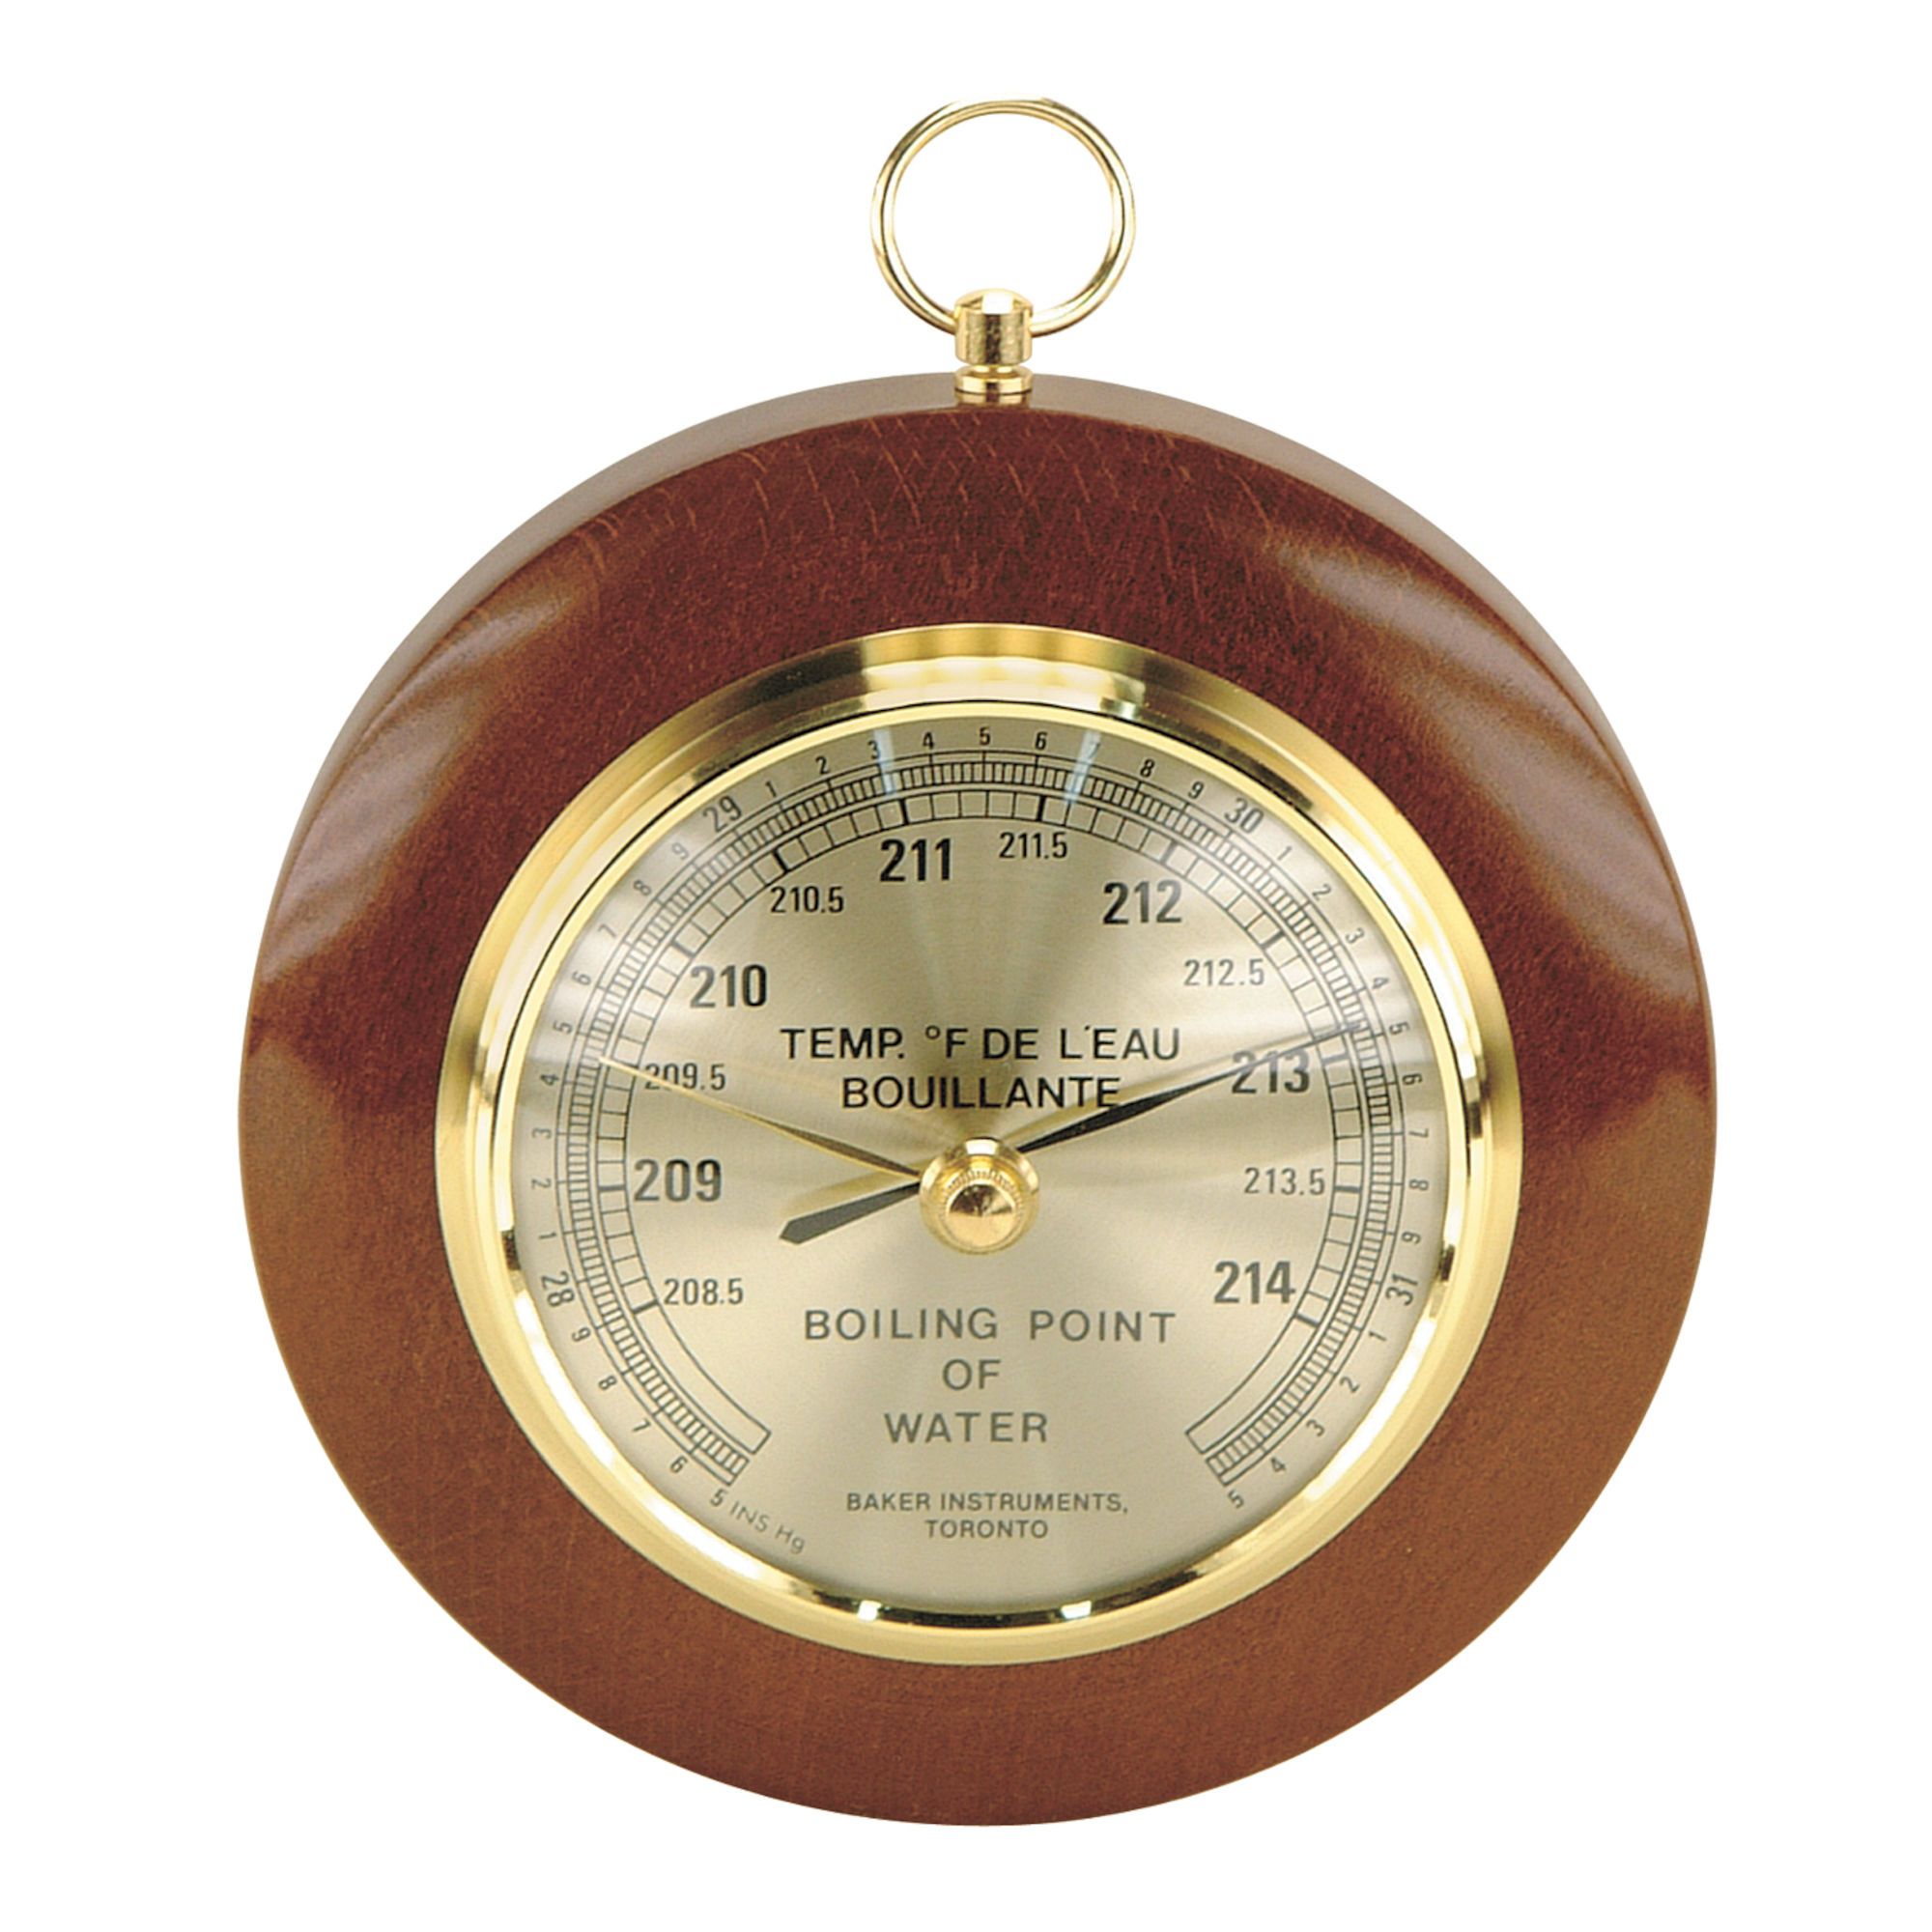 Maple processor barometer from EQUIPEMENTS D'ERABLIERE CDL